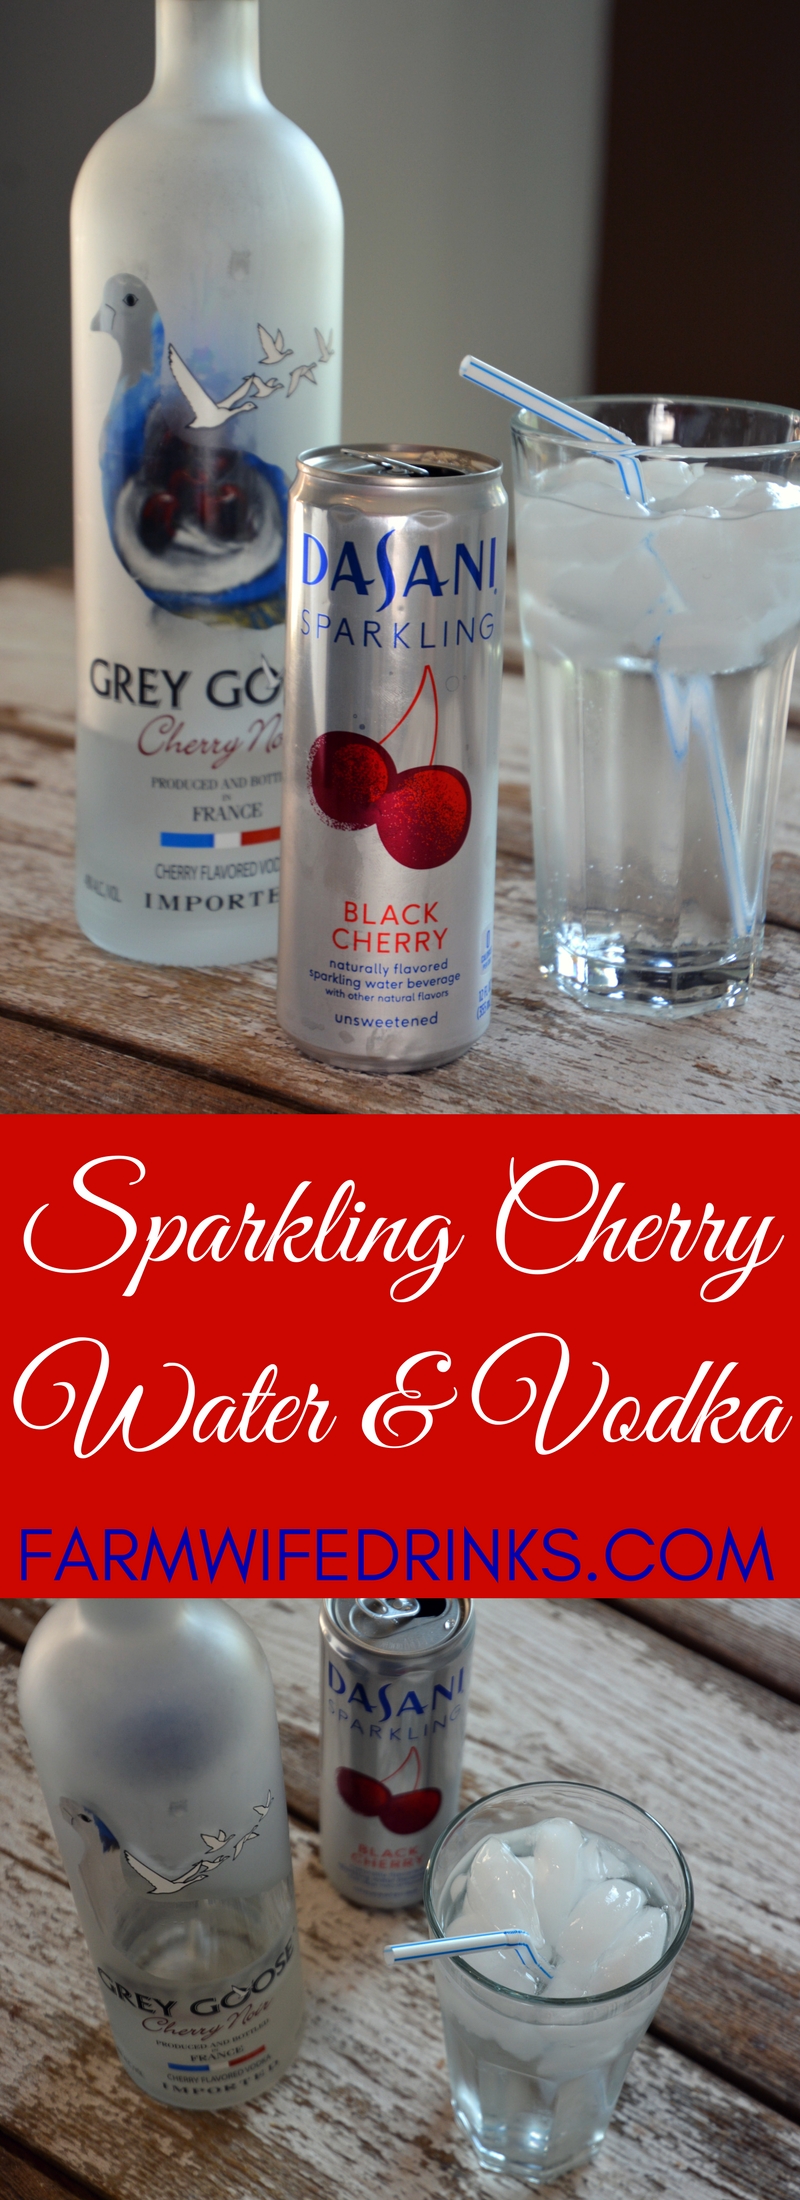 Sparkling Cherry Water and Vodka